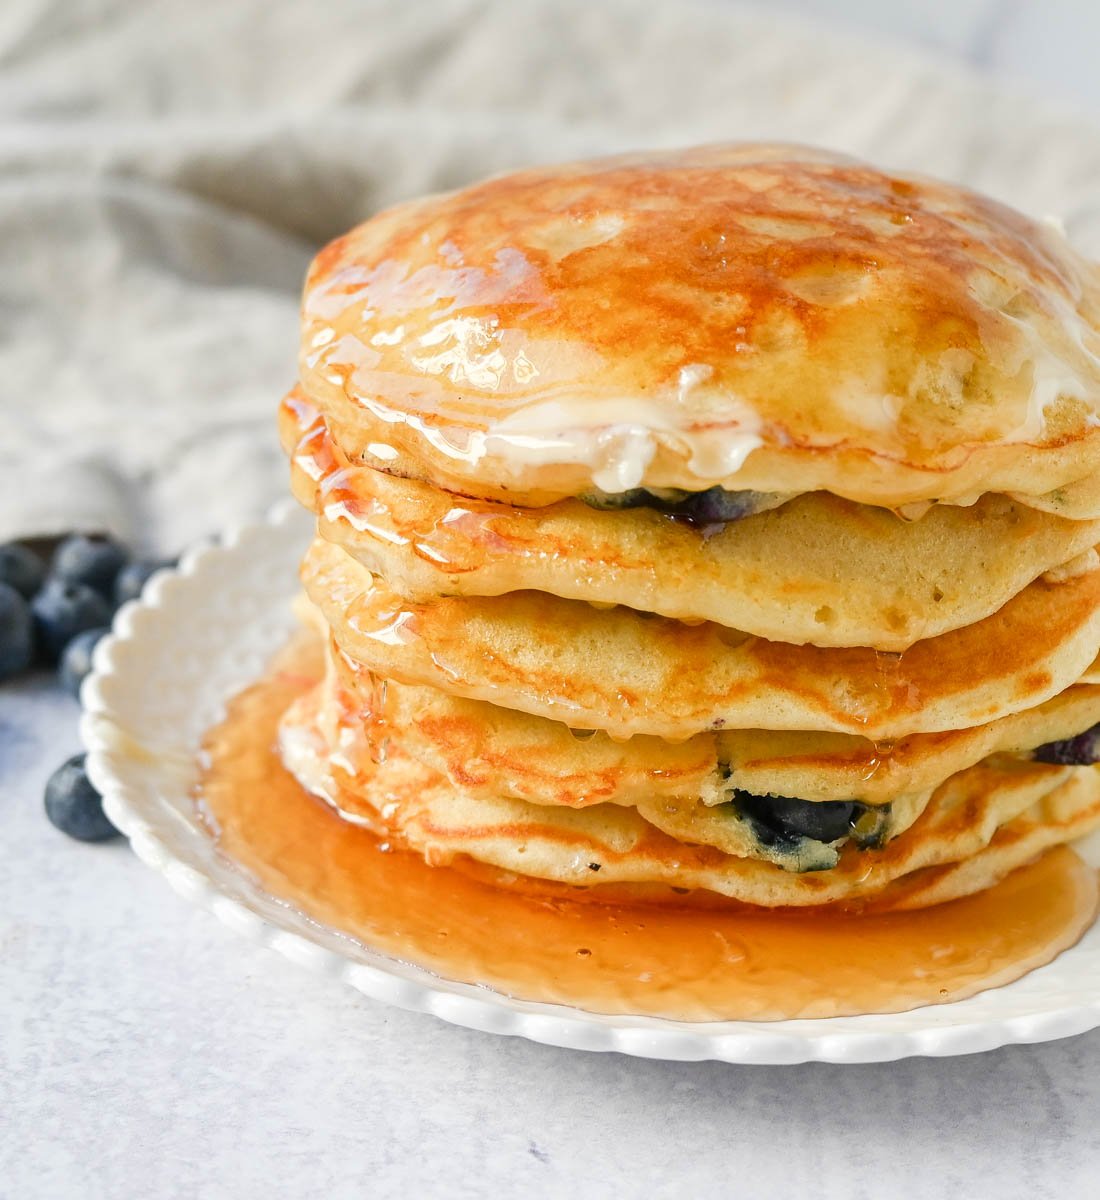 Homemade fluffy blueberry pancakes are made with fresh blueberries and are the best buttermilk blueberry pancakes ever! These are easy blueberry pancakes made from scratch.